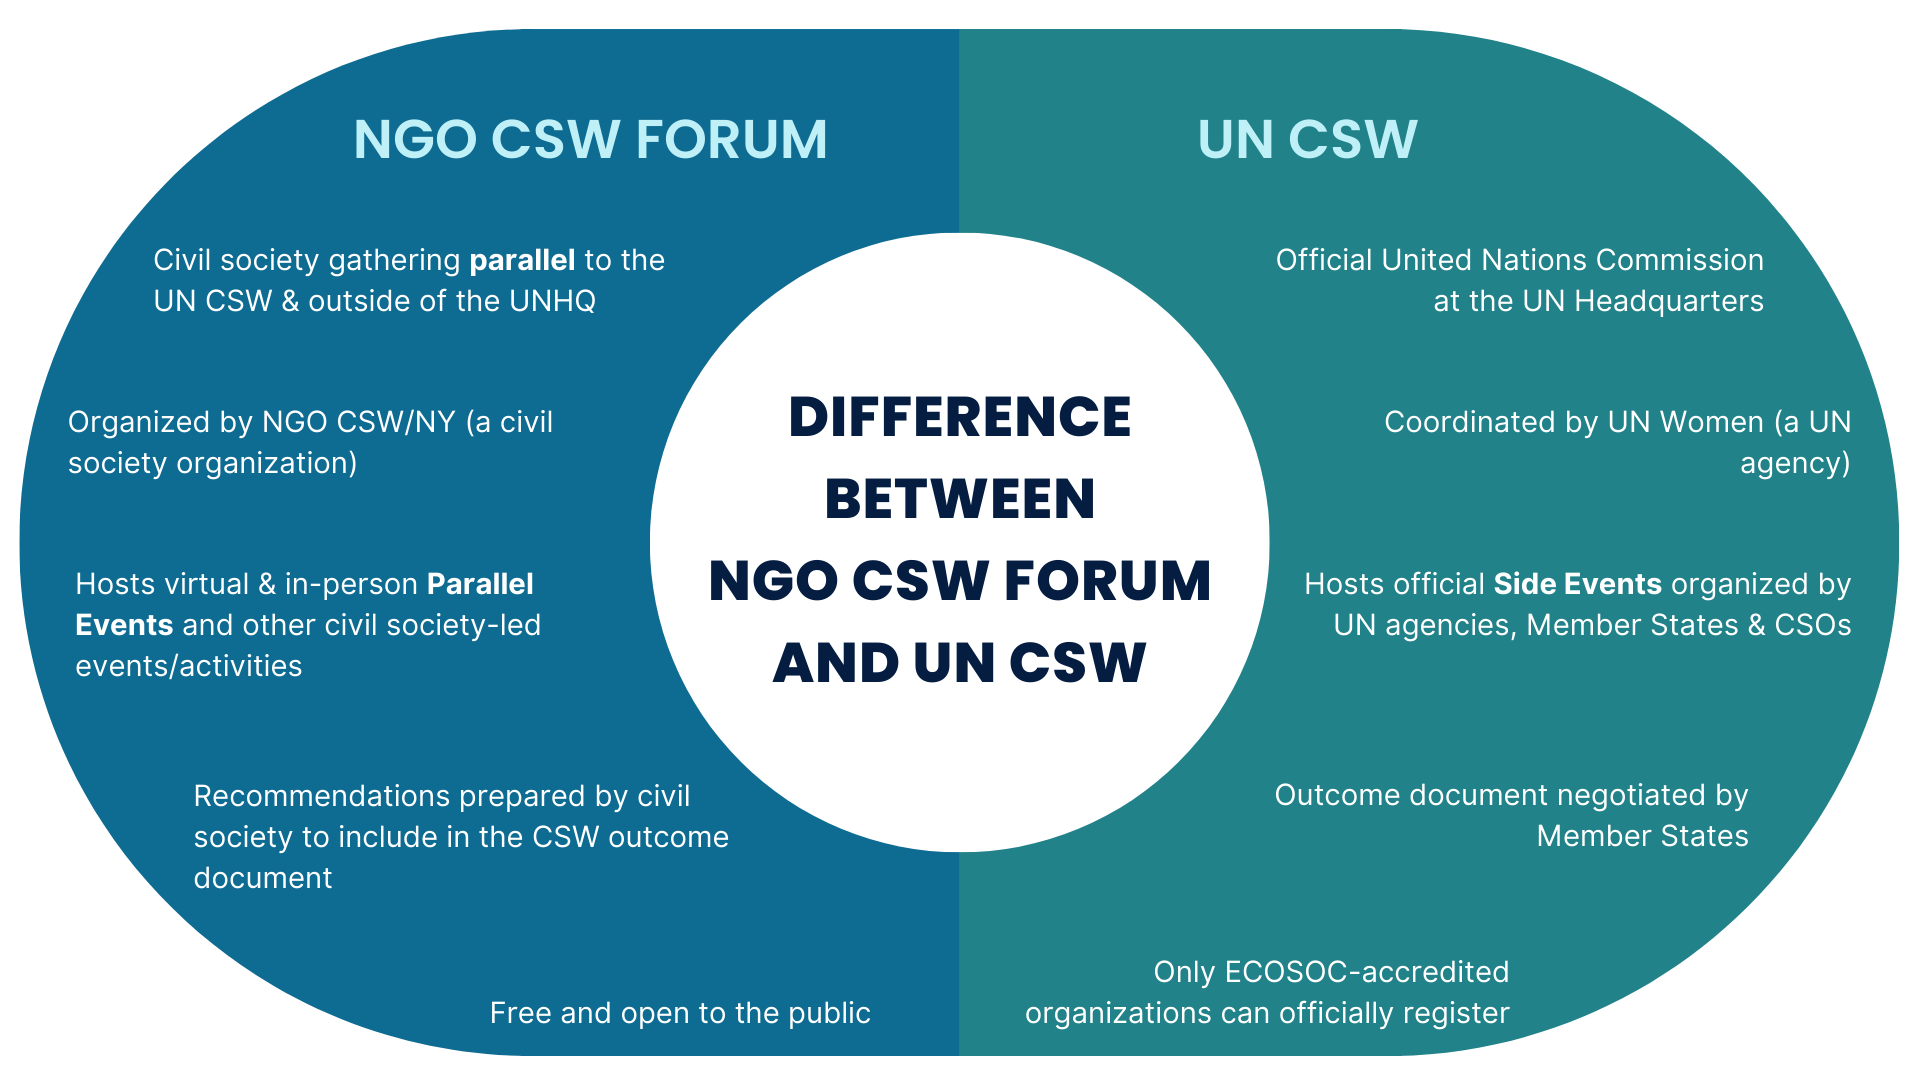 Difference between NGO CSW Forum and UN CSW